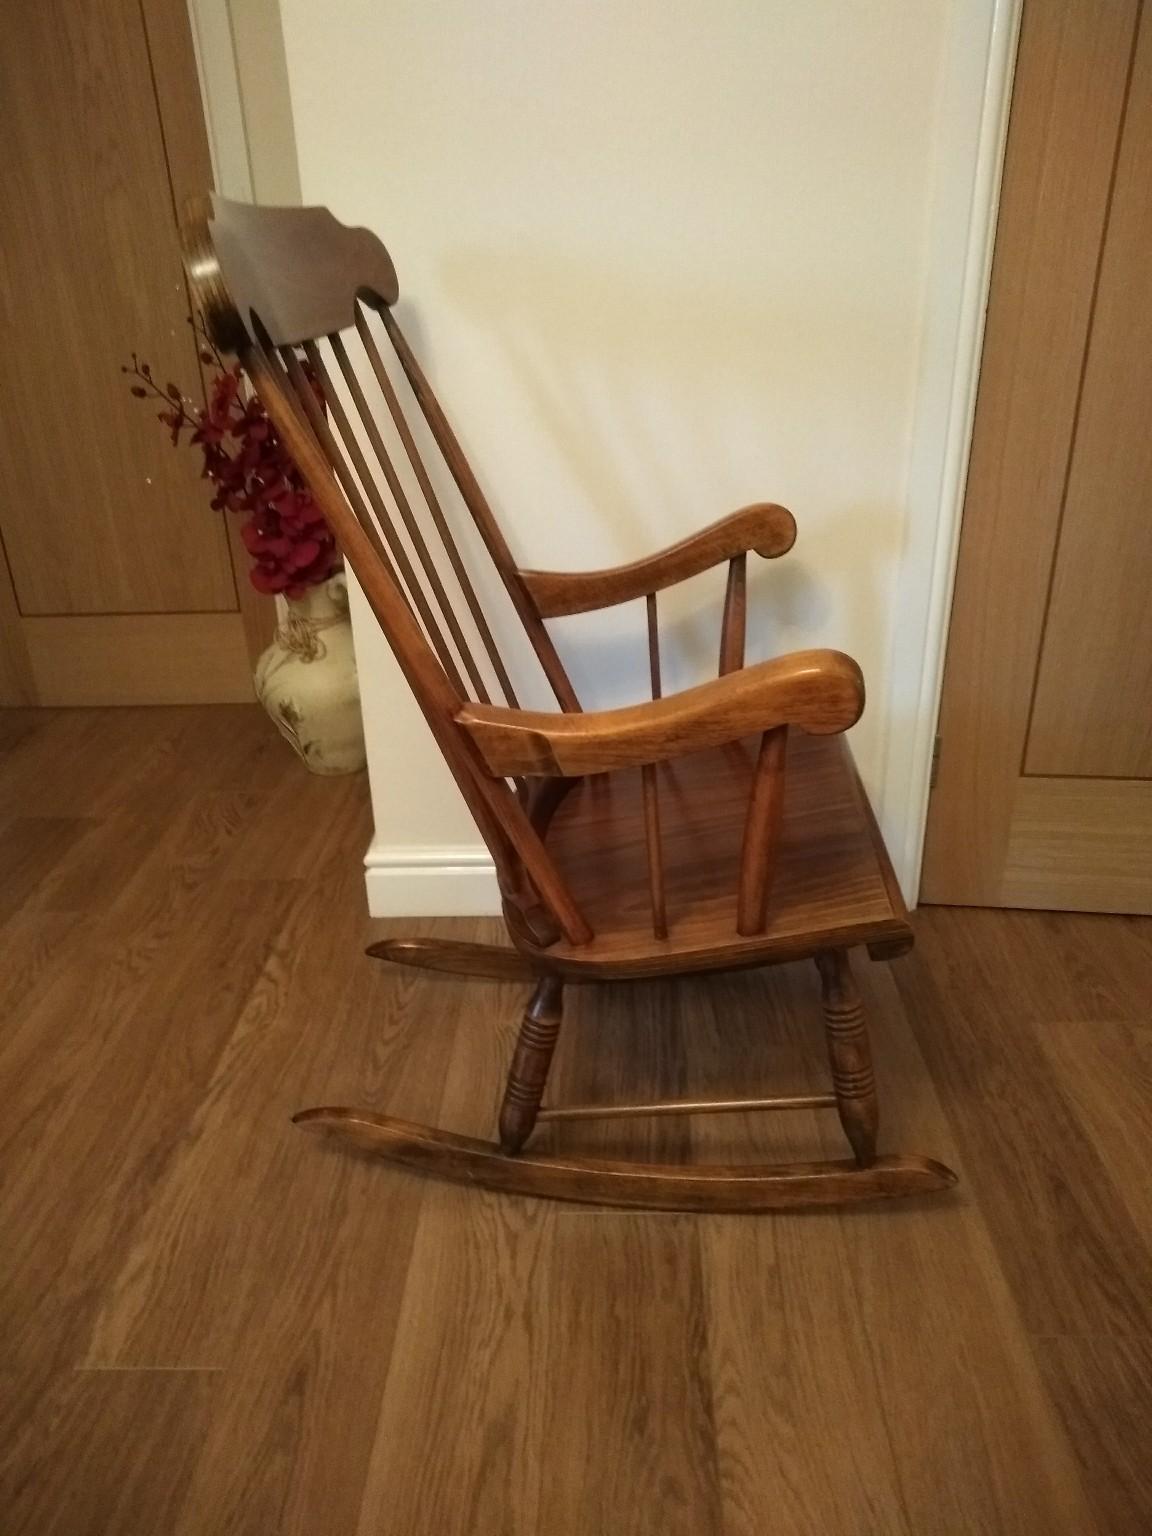 WOODEN ROCKING CHAIR in DY8 Dudley for £42.50 for sale ...